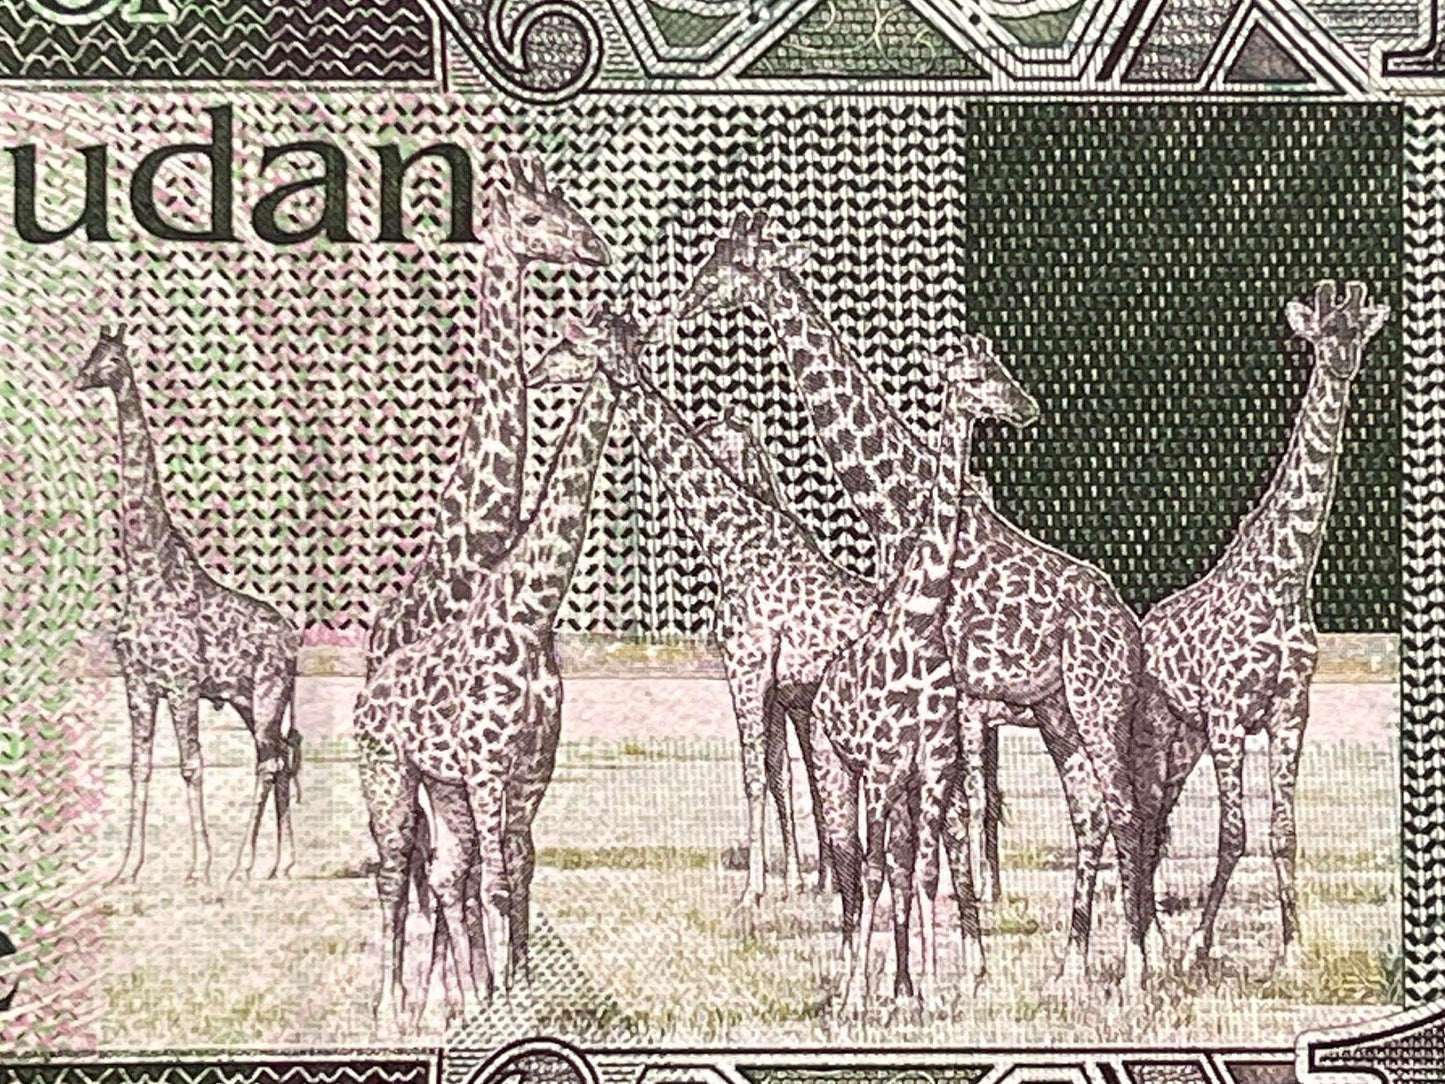 Nubian Giraffes & Revolutionary Leader Dr. John Garang 1 Pound South Sudan Authentic Banknote Money for Jewelry and Collage (Economist)